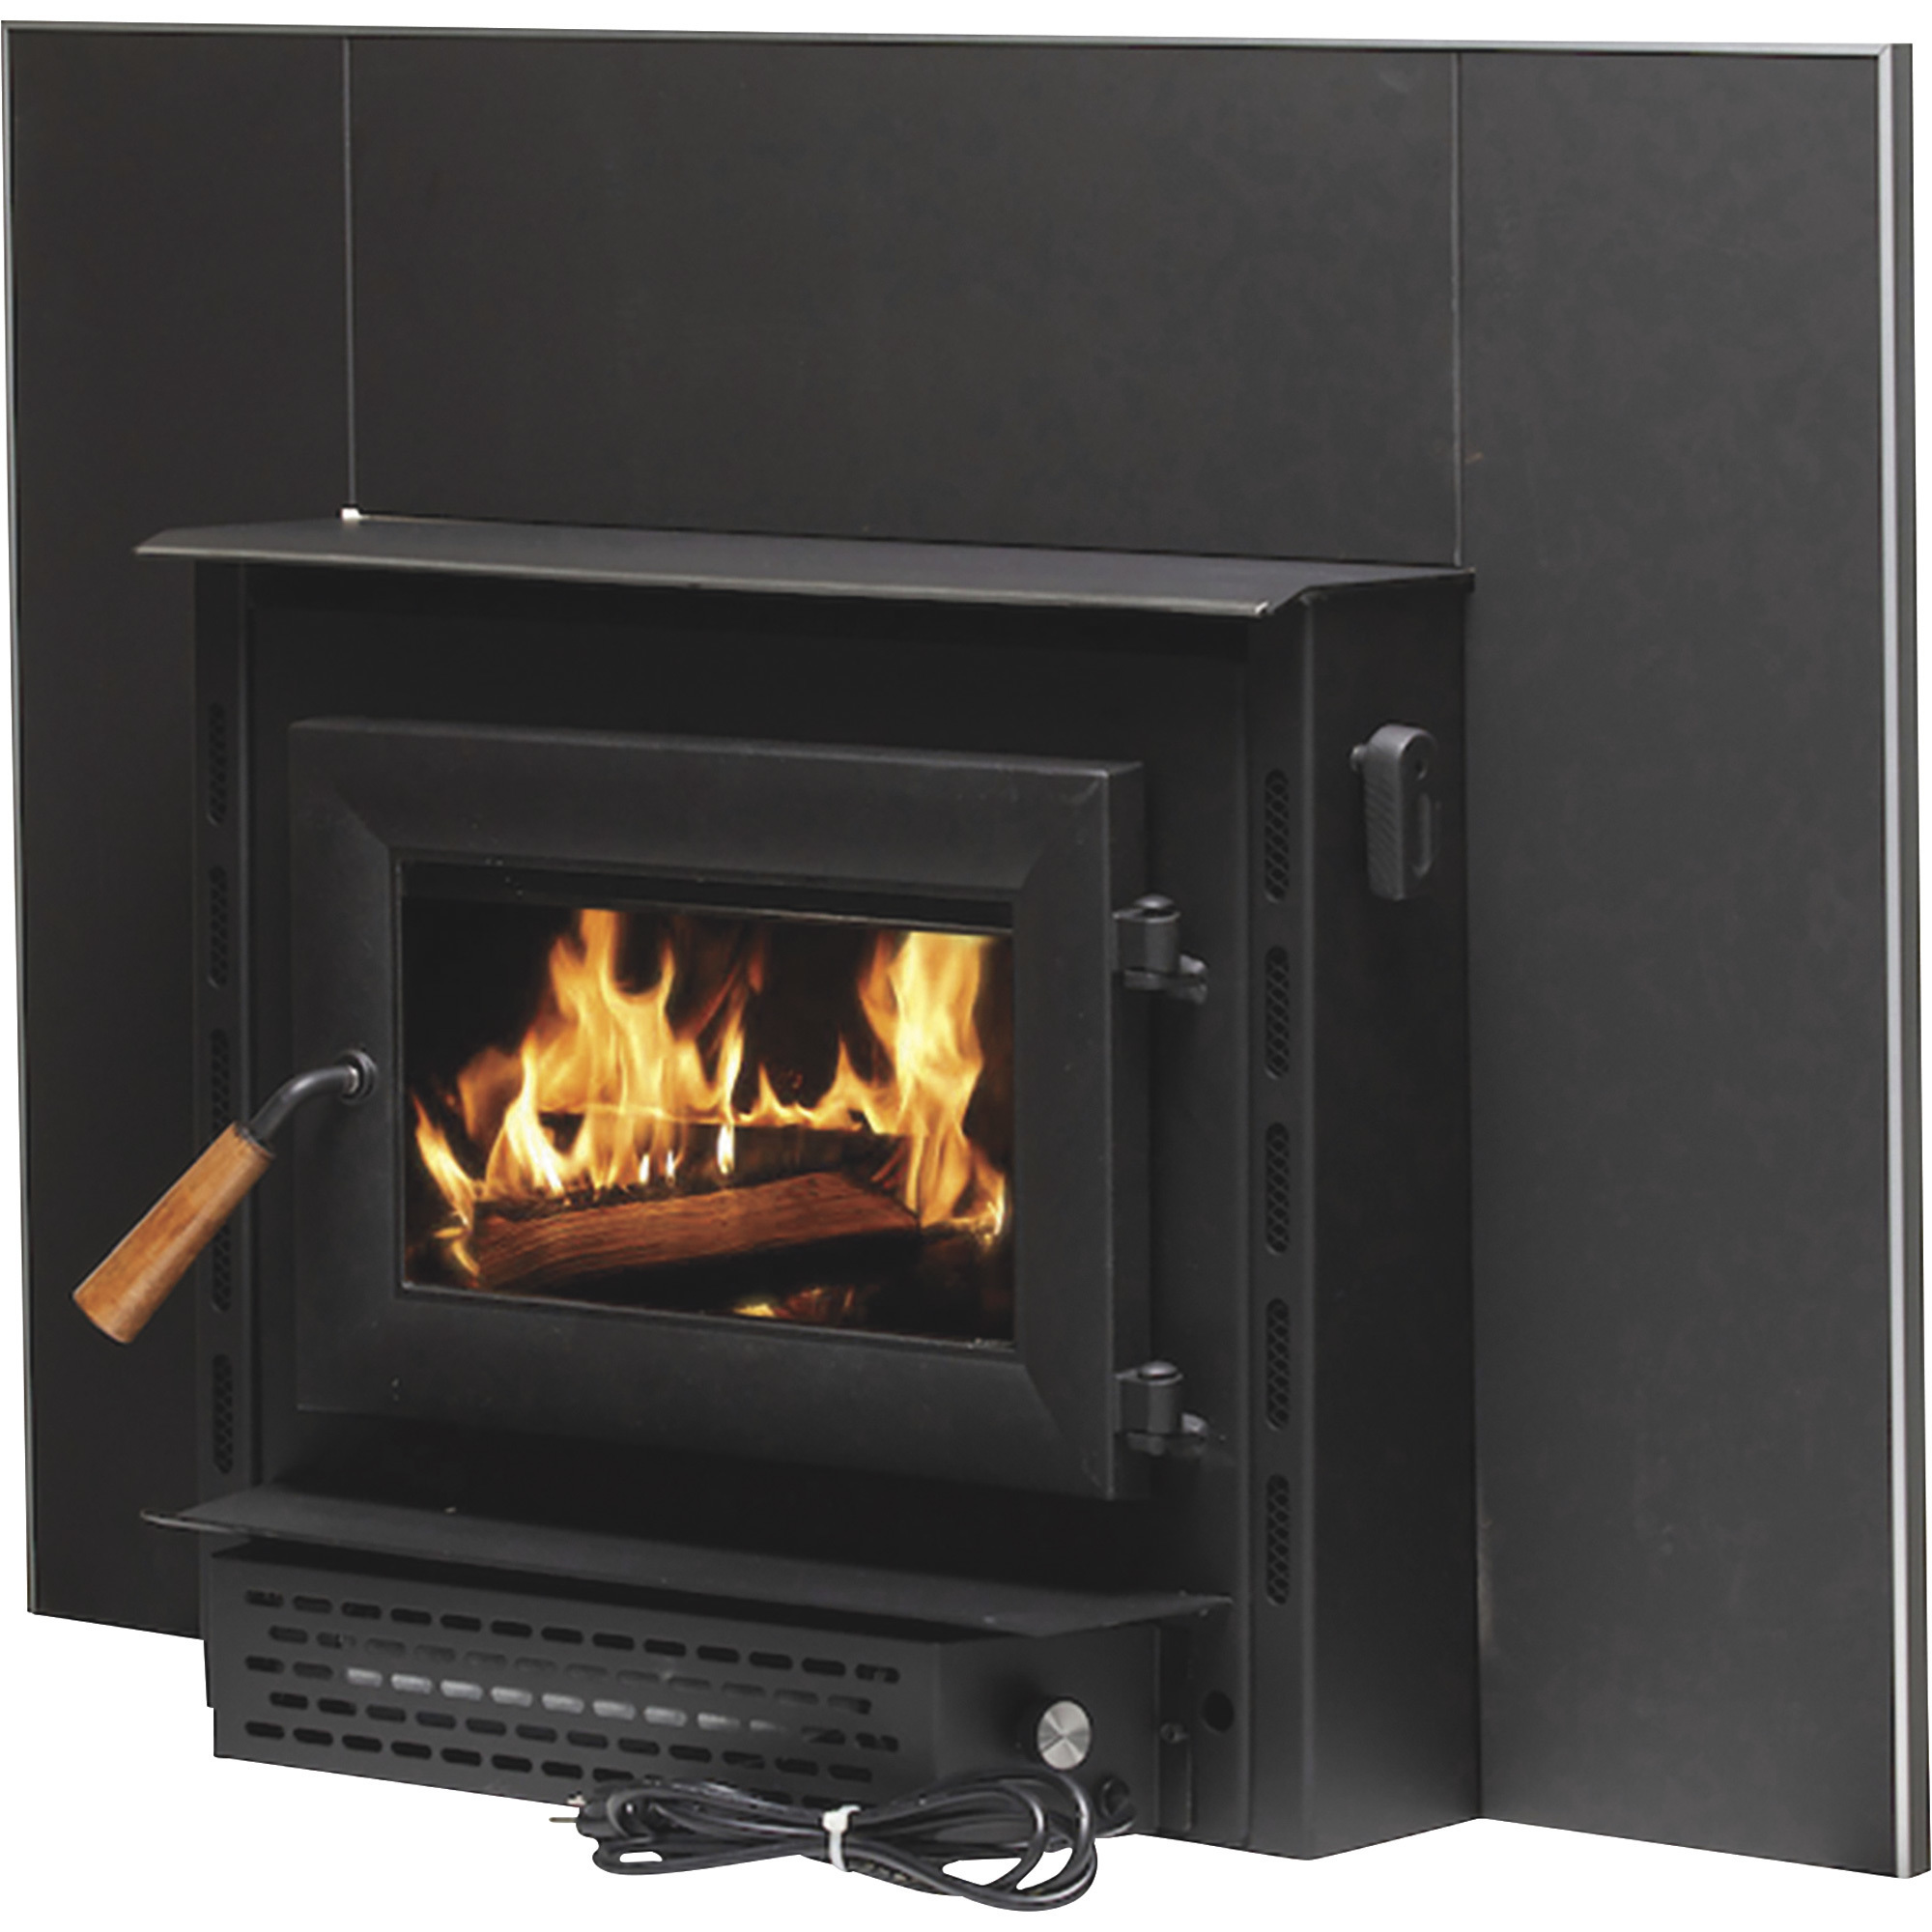 Vogelzang Deluxe Wood Burning Fireplace Insert with Blower and Vent Kit, 69,000 BTU, EPA Certified, Model VG1820E-D